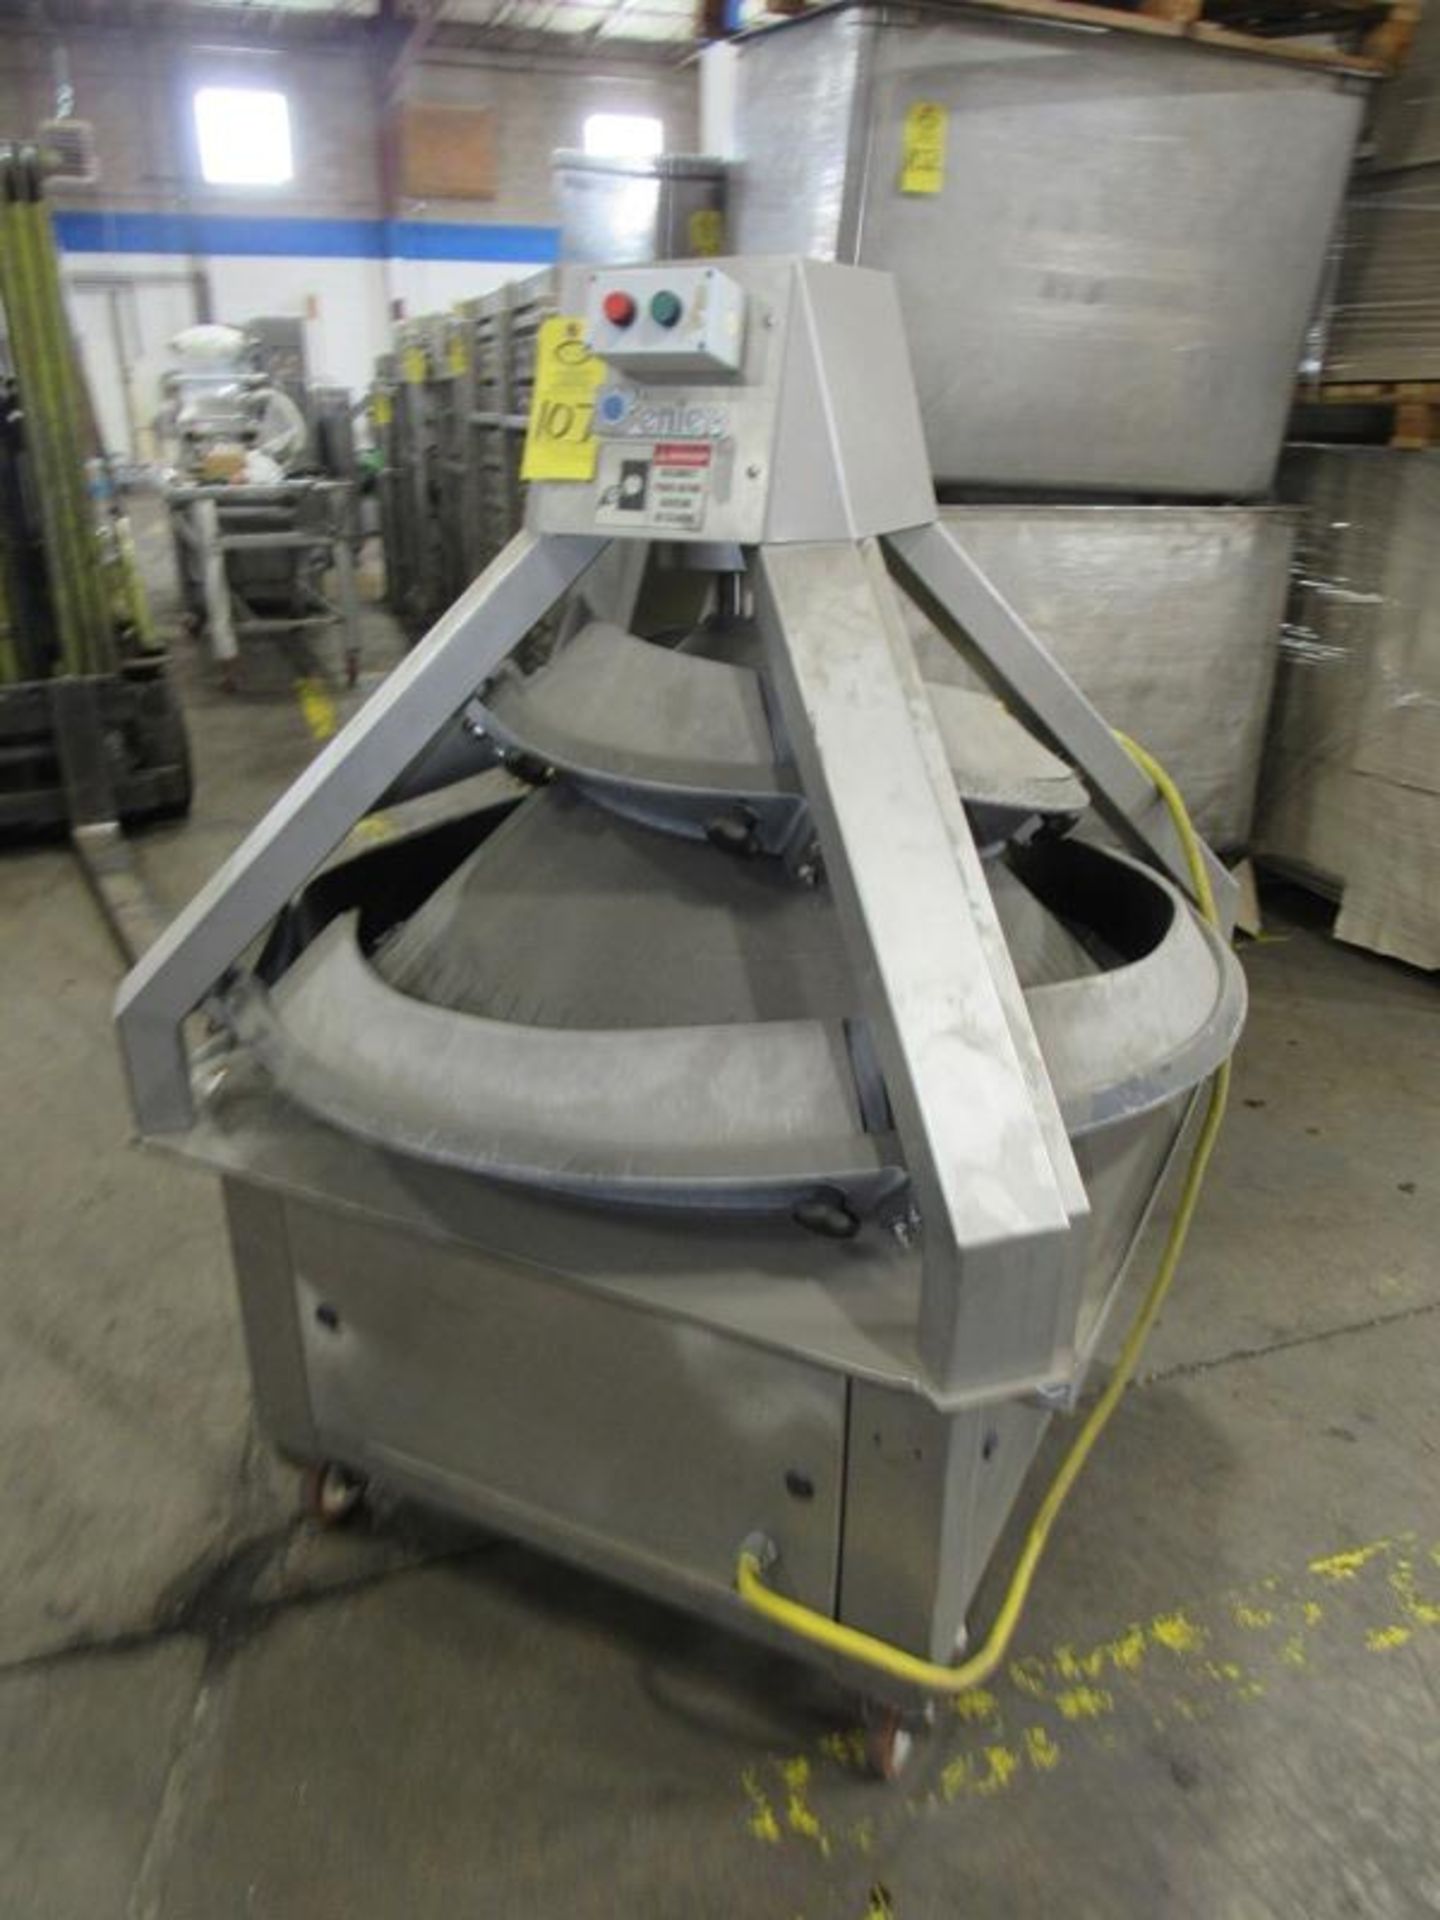 Benier Mdl. 005MTSS Dough Ball Rounder, Ser. #7.1820, 208/230 volts, 3 phase on wheels, Located in